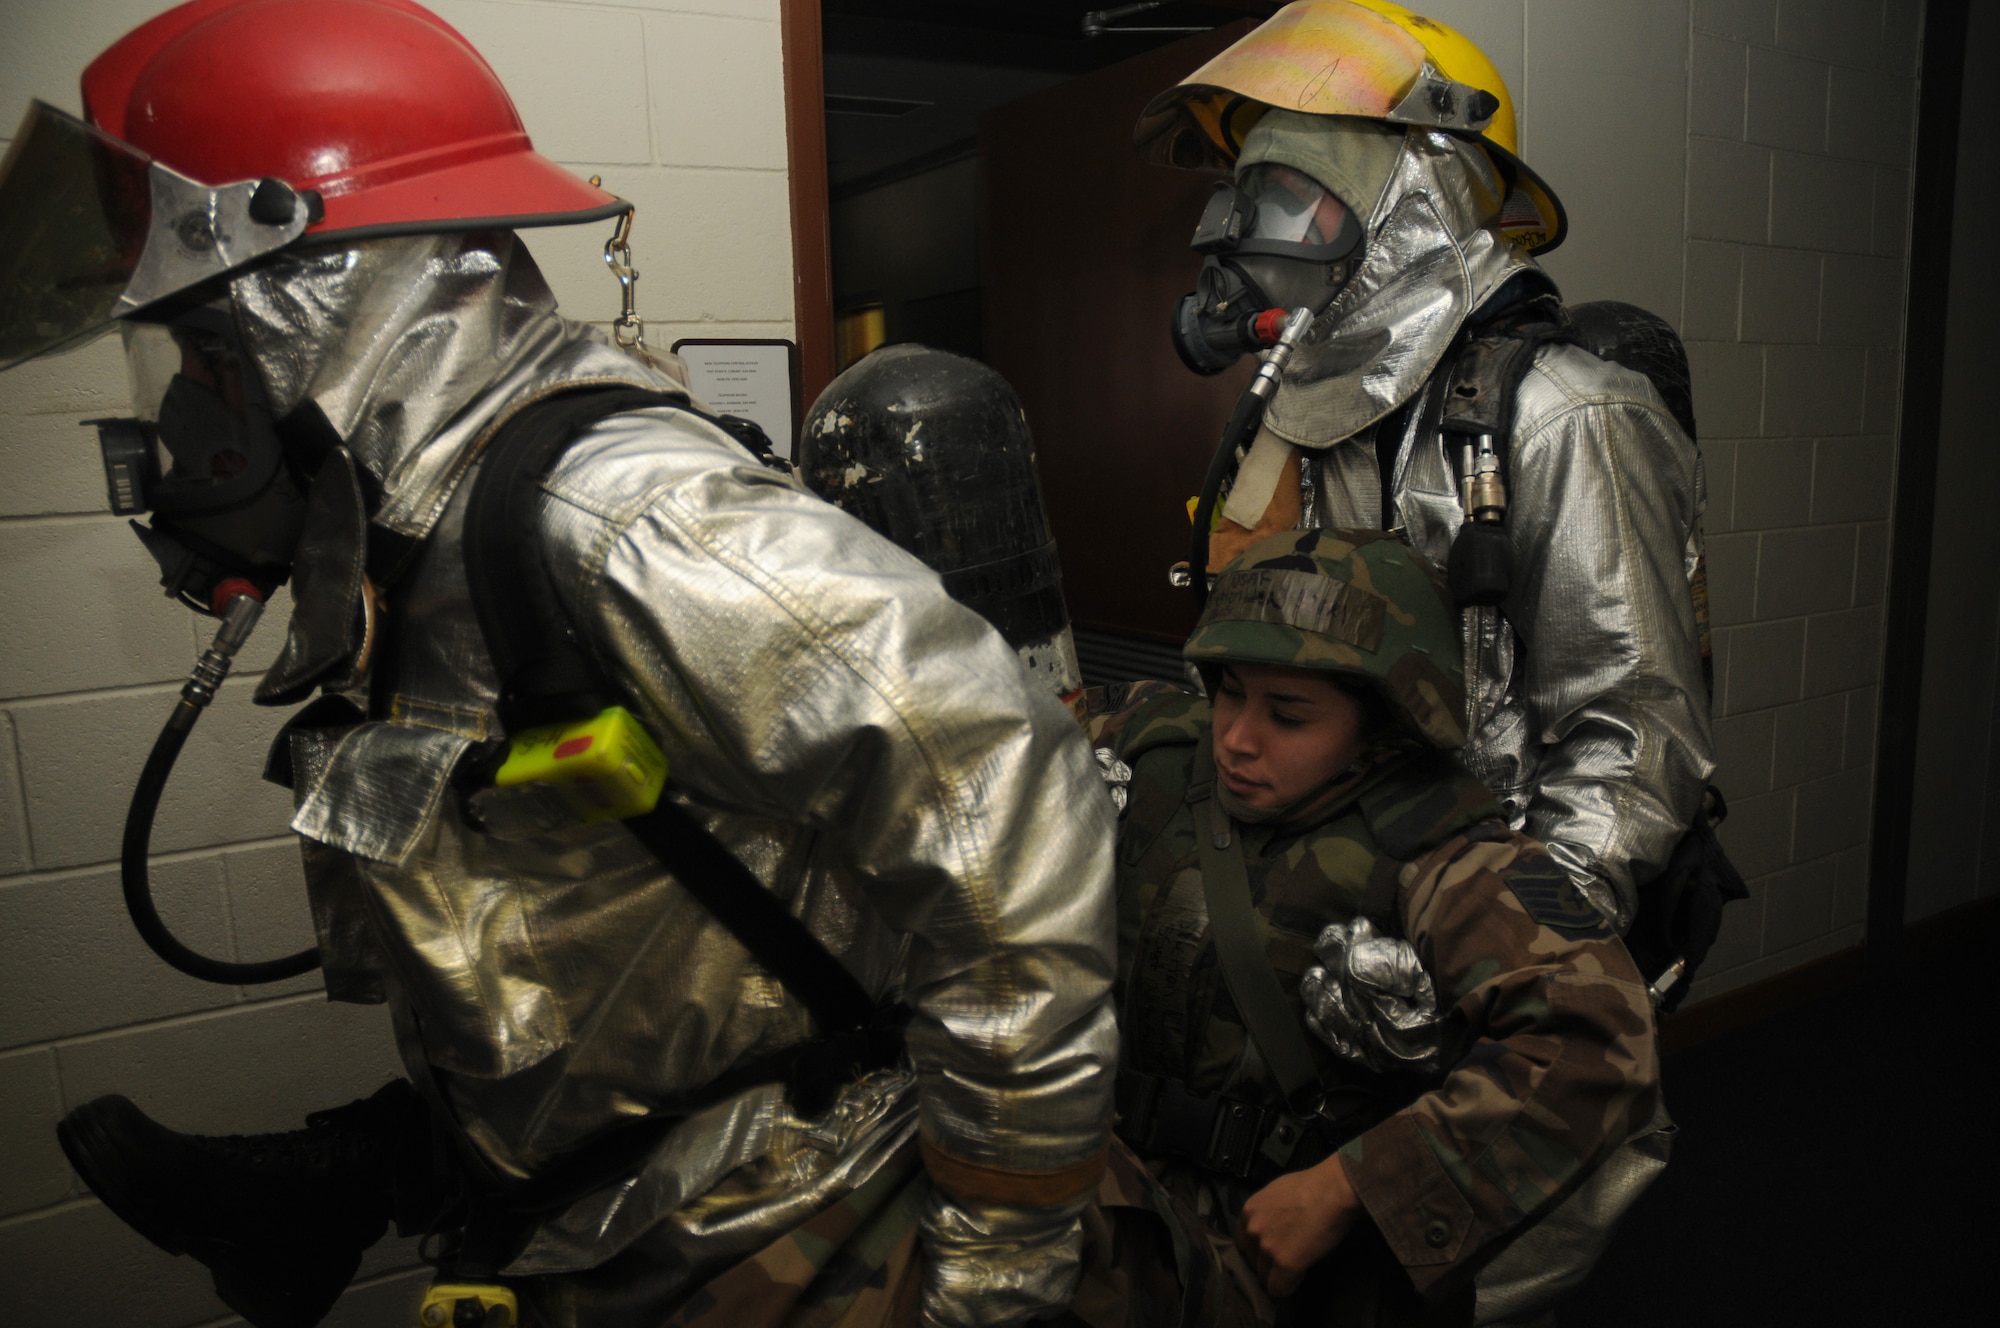 Kadena fire fighters remove an injured person from a building following a simulated missile strike at Kadena Air Base, Japan Dec. 03, 2008. The simulation is part of a Local Operational Readiness Exercise meant to test the operational readiness of Kadena Airmen. (U.S. Air Force photo/Airman 1st Class Chad Warren)